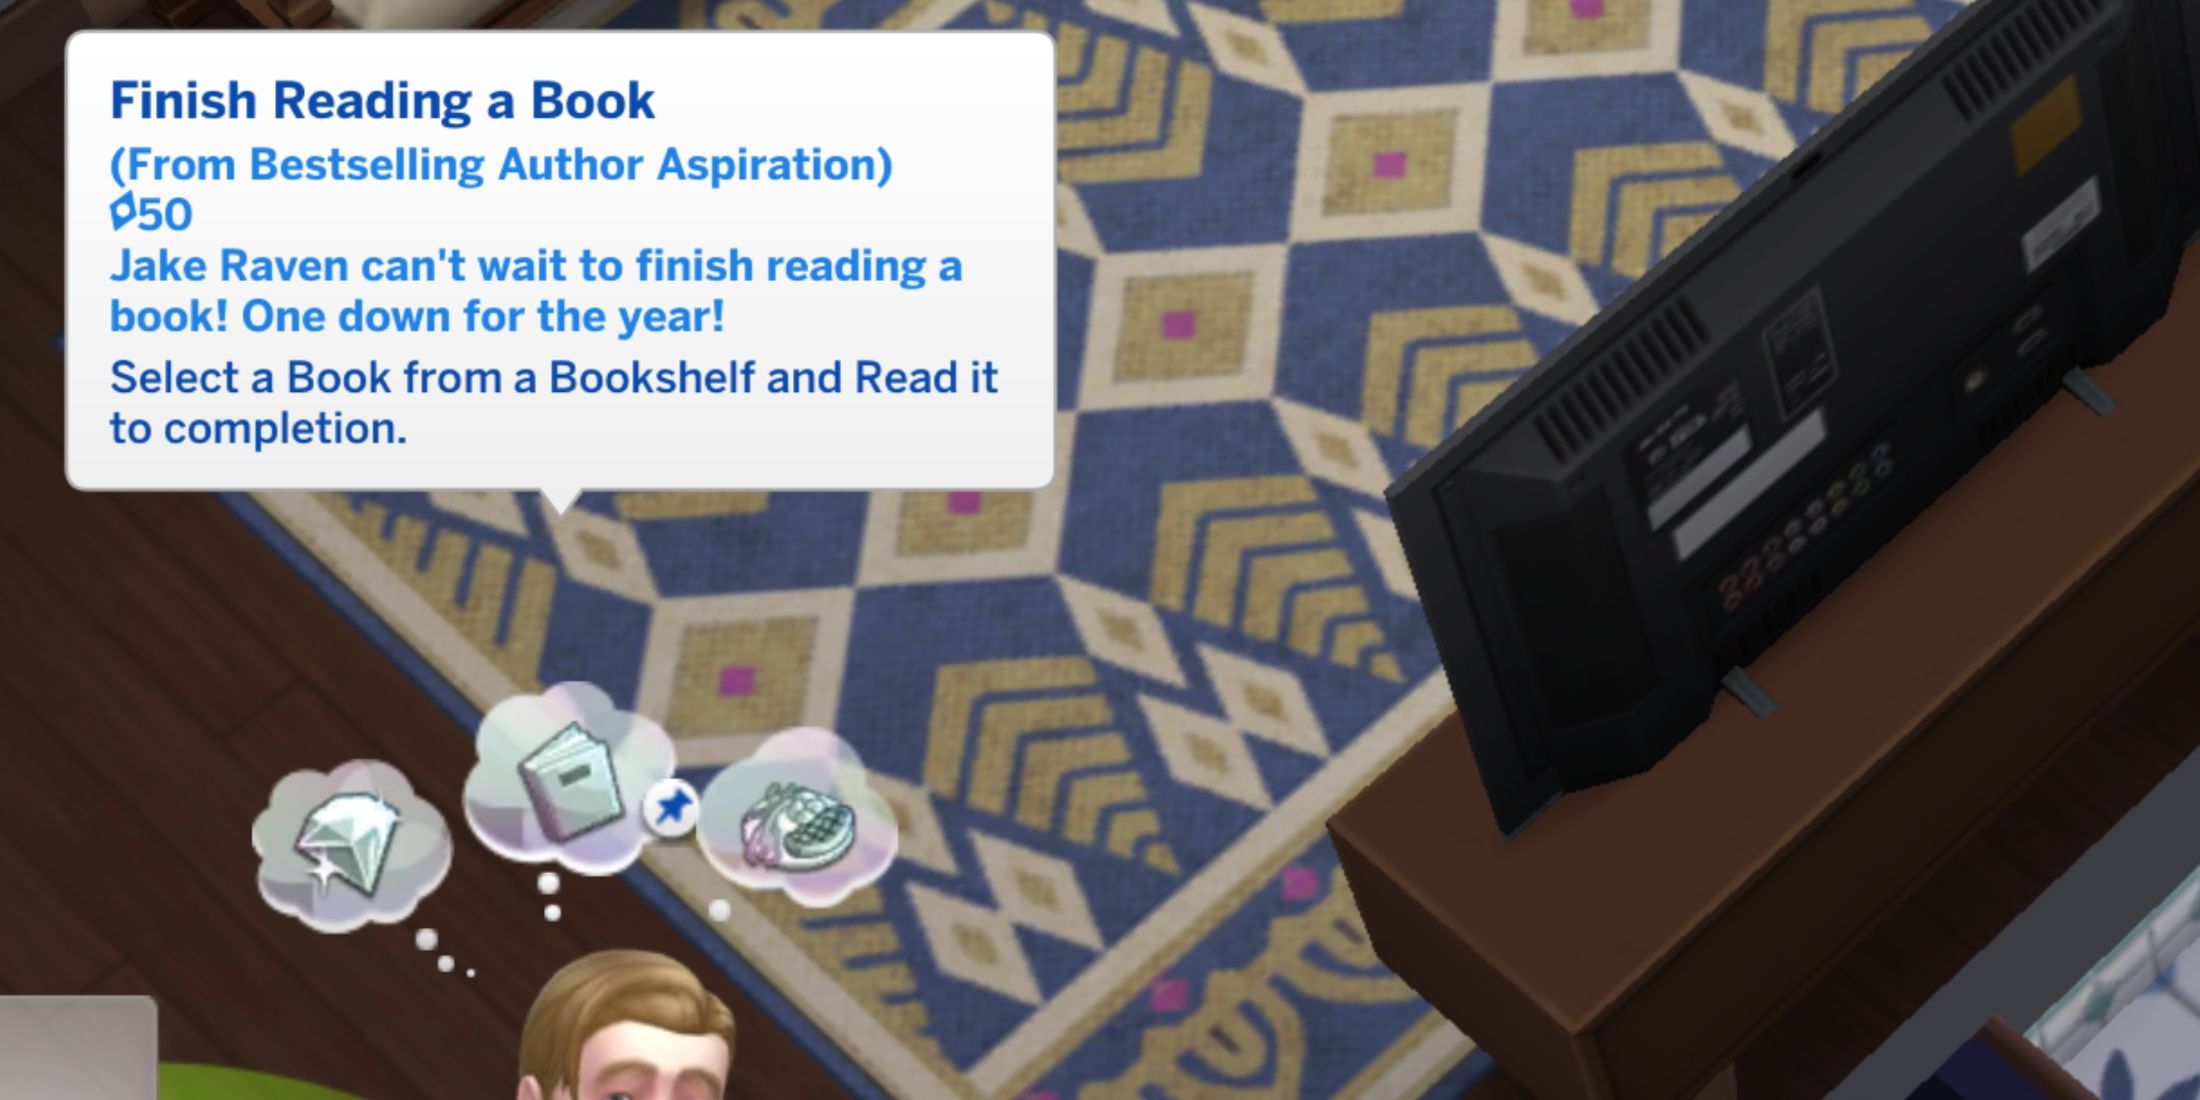 sim asking to read a book as a whim